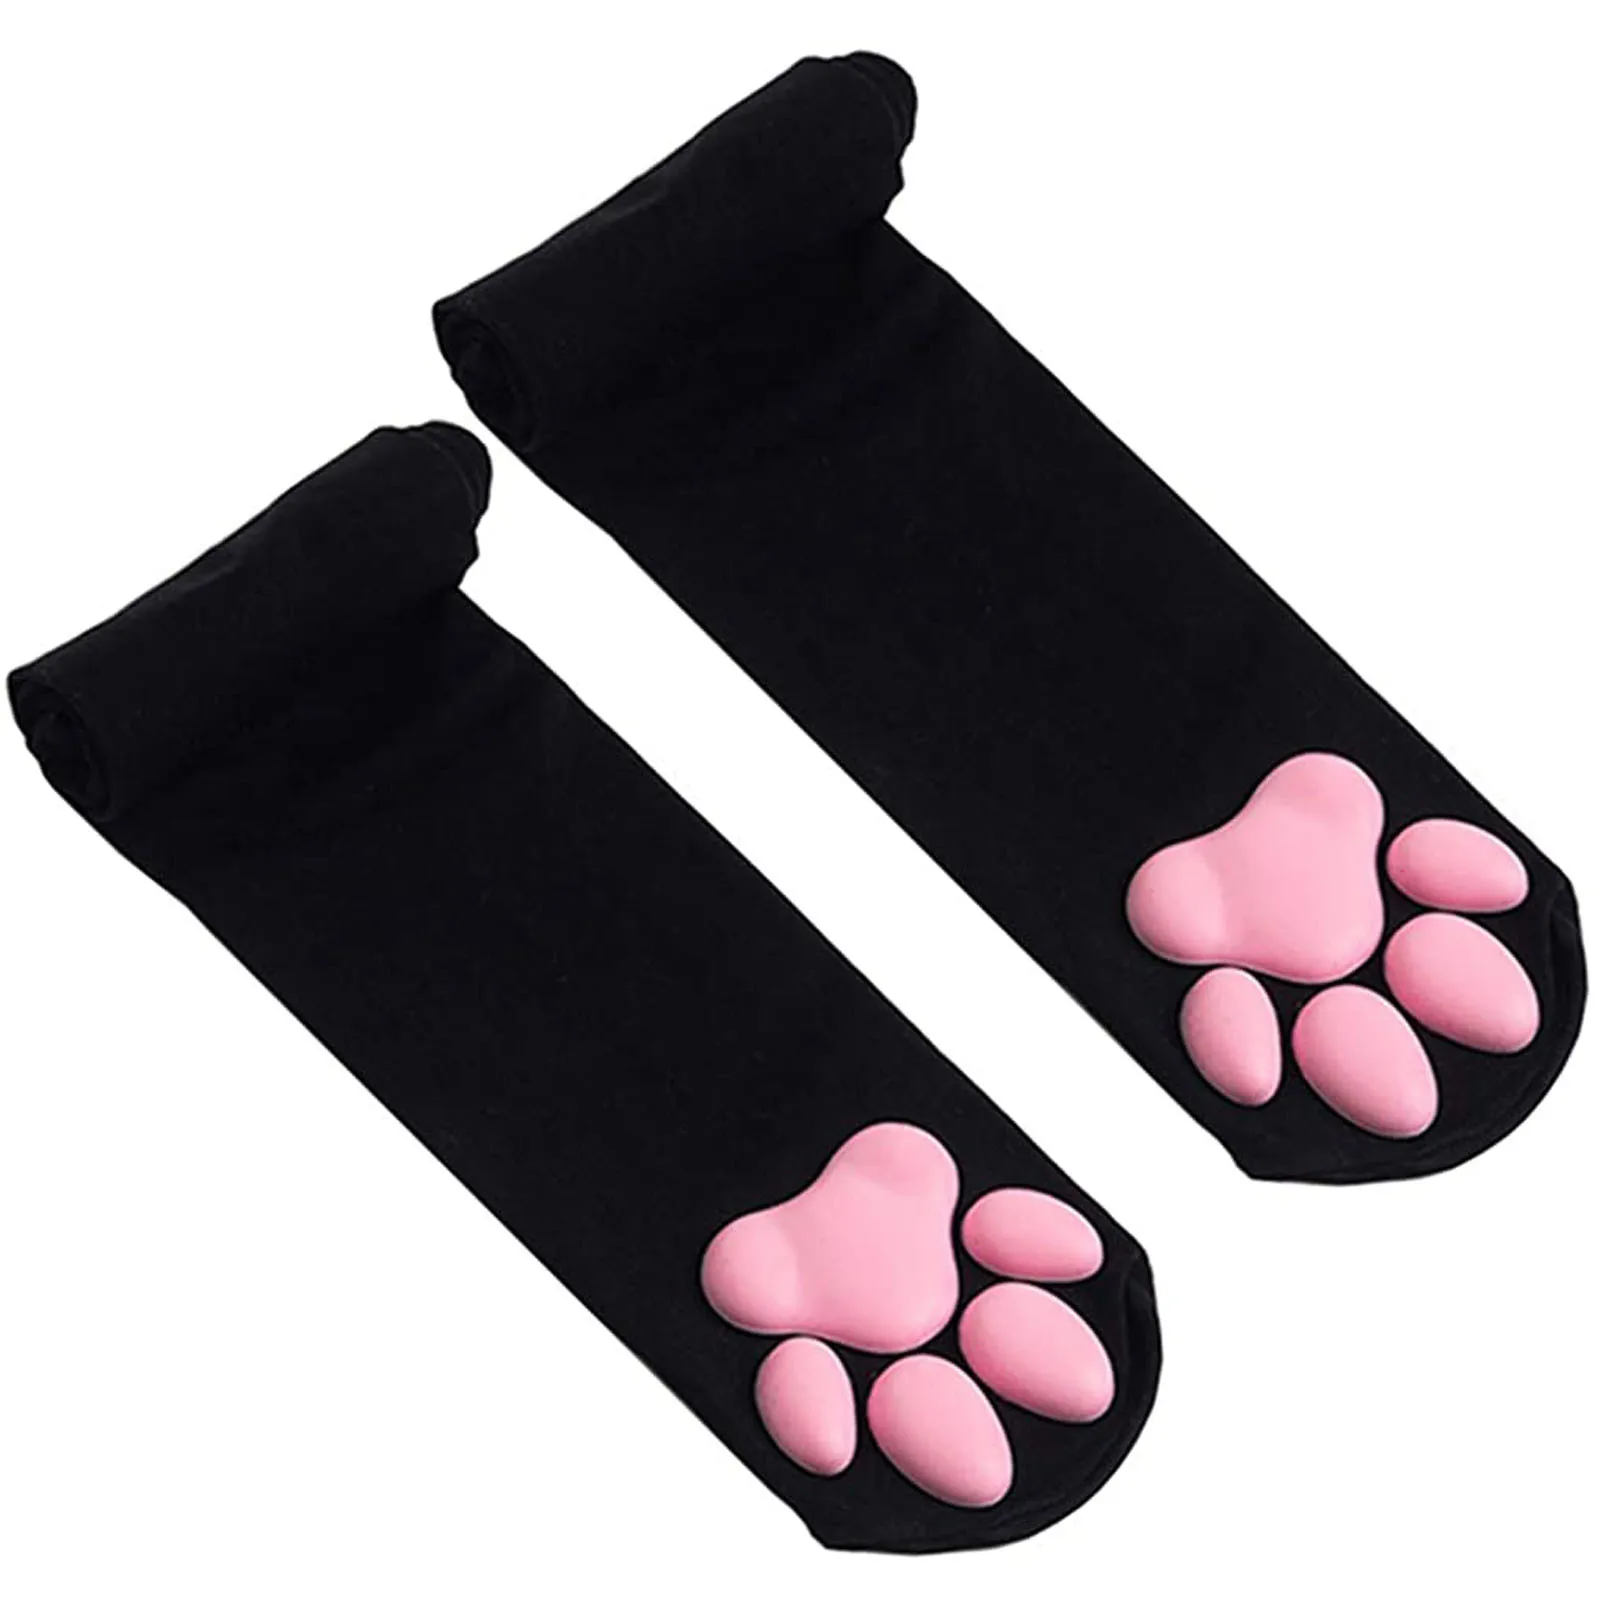 

Cute Cosplay Long Cat Paw Pad Cotton Stockings For Women Girls Cat Pawpads Footprint Over Knee Thigh Stocking Toe Cute R5